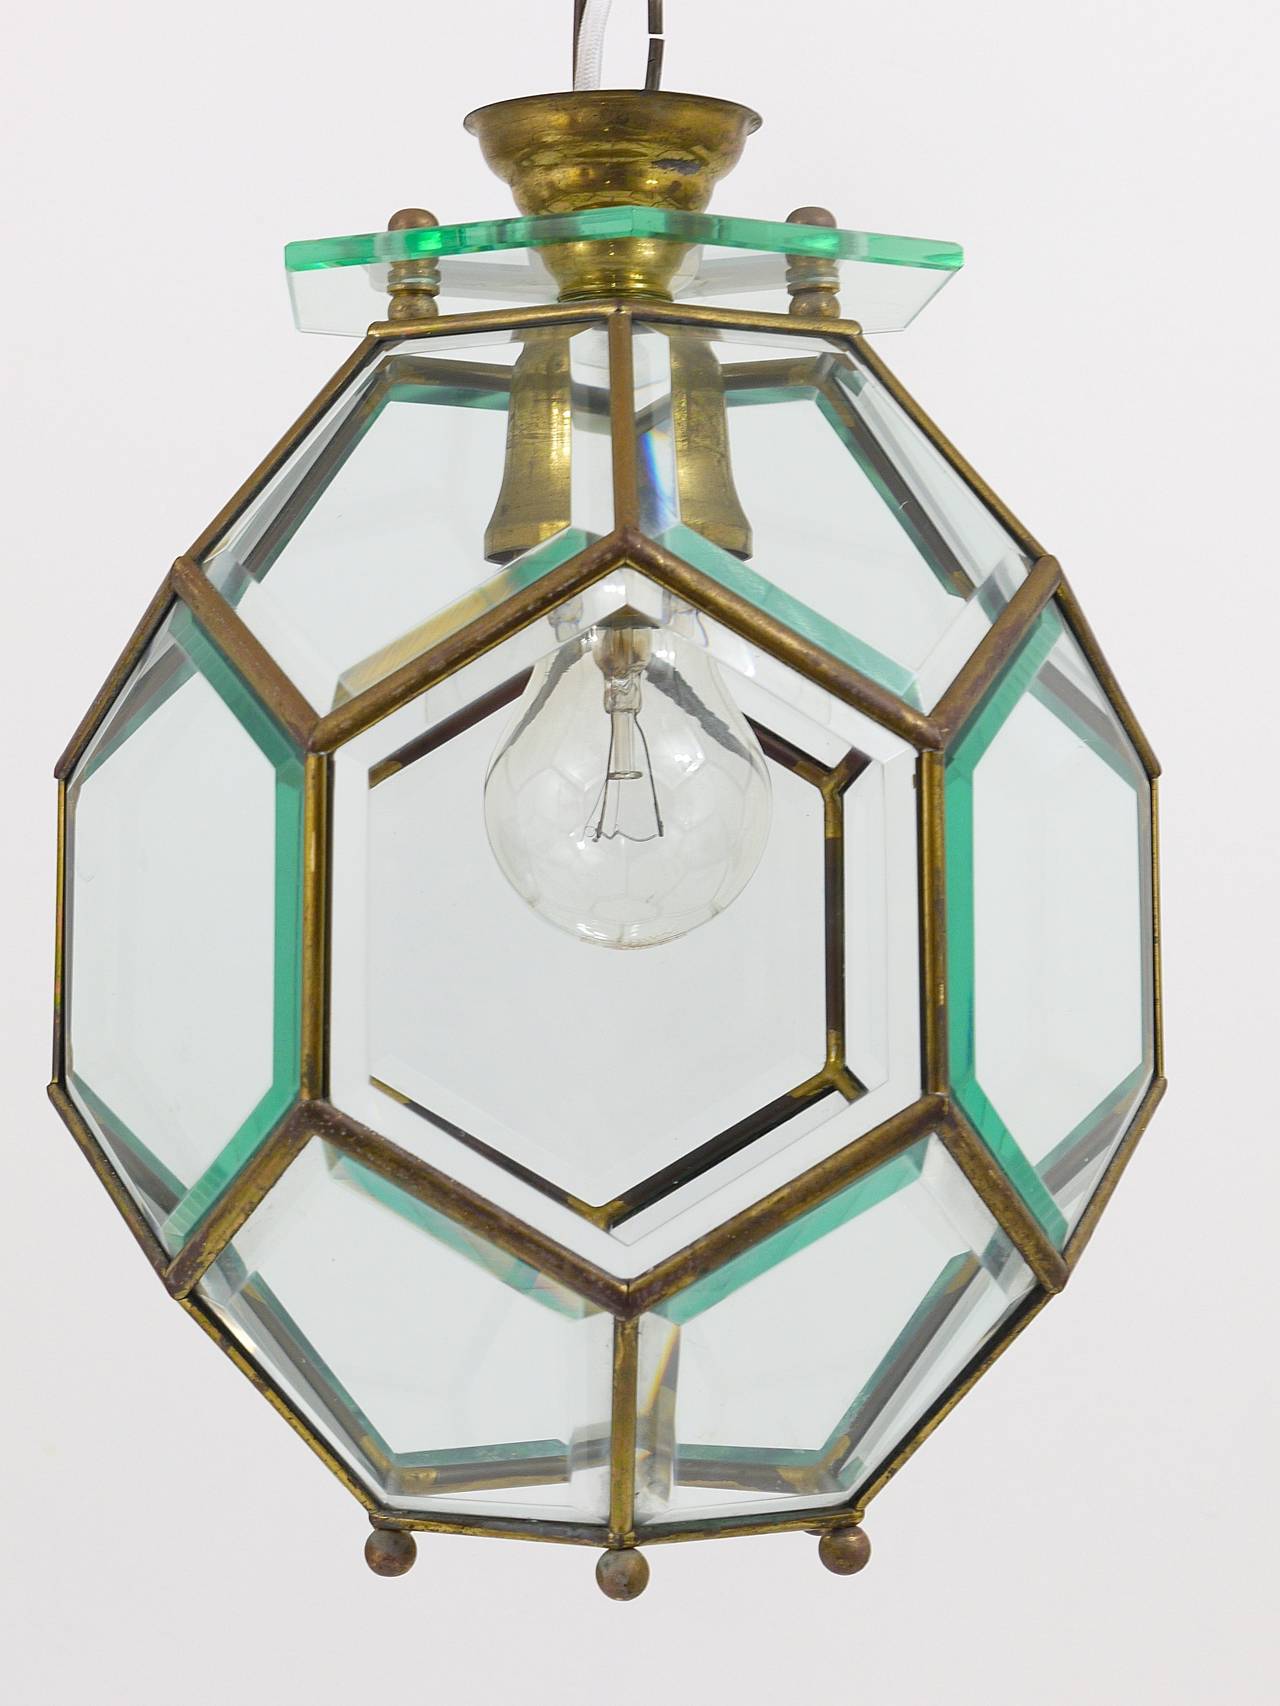 Early 20th Century Art Nouveau Secessionist Pendant Lamp in the Manner of Adolf Loos, Knize